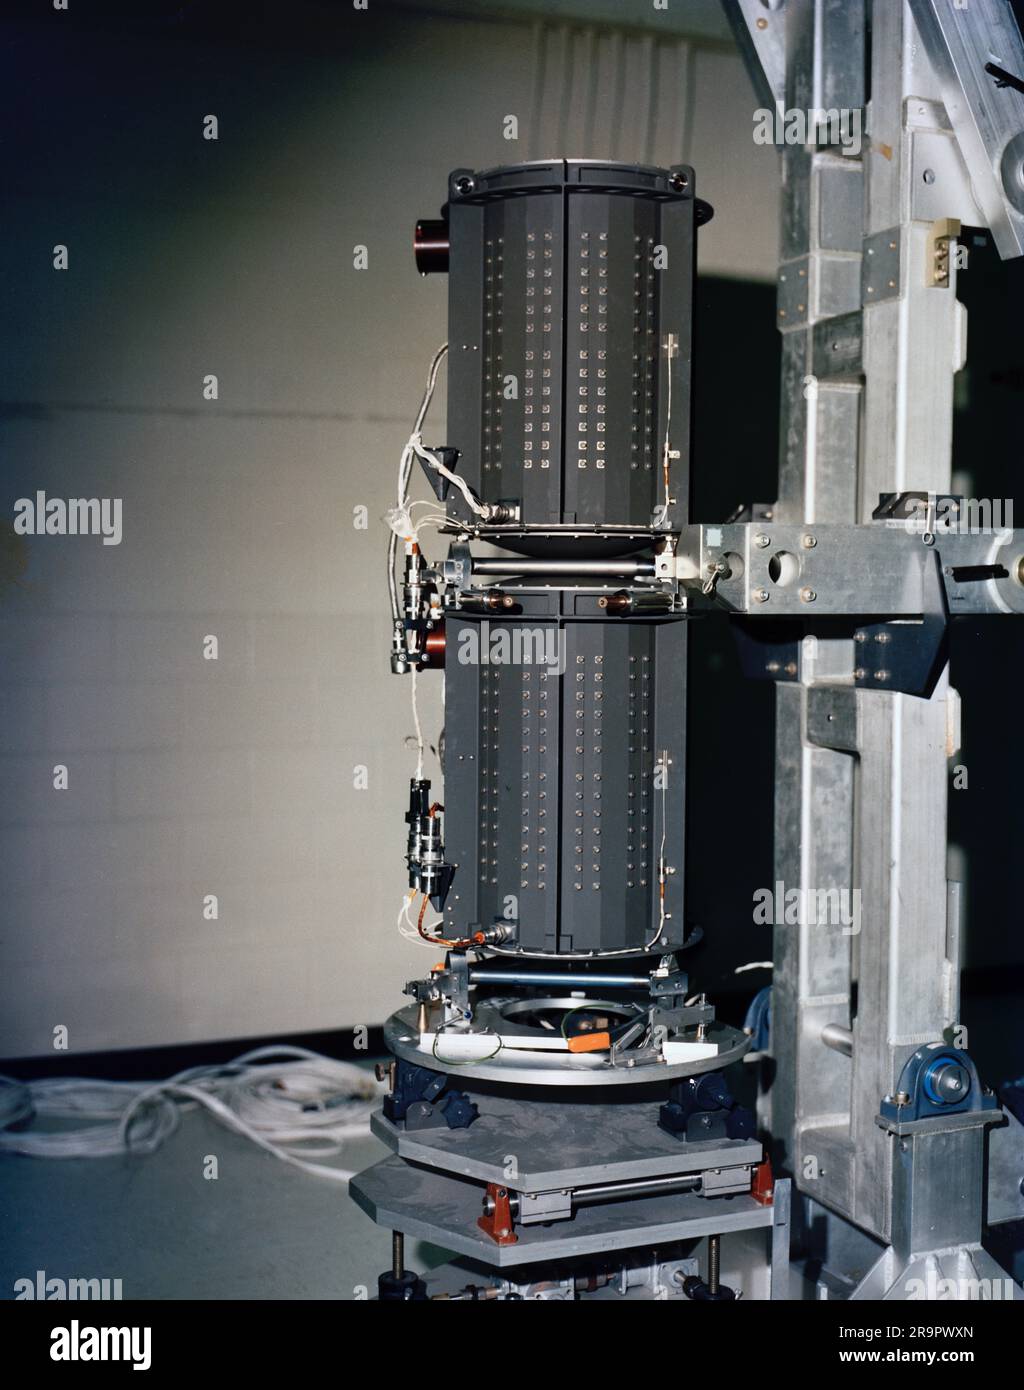 Voyager's RTG. Each of NASA's Voyager probes are equipped with three radioisotope thermoelectric generators (RTGs), including the one shown here at NASA's Kennedy Space Center in Florida. The RTGs provide power for the spacecraft by converting the heat generated by the decay of plutonium-238 into electricity. Launched in 1977, the Voyager mission is managed for NASA by the agency's Jet Propulsion Laboratory, a division of Caltech in Pasadena, California. https //photojournal.jpl.nasa.gov/catalog/PIA25782 Stock Photo